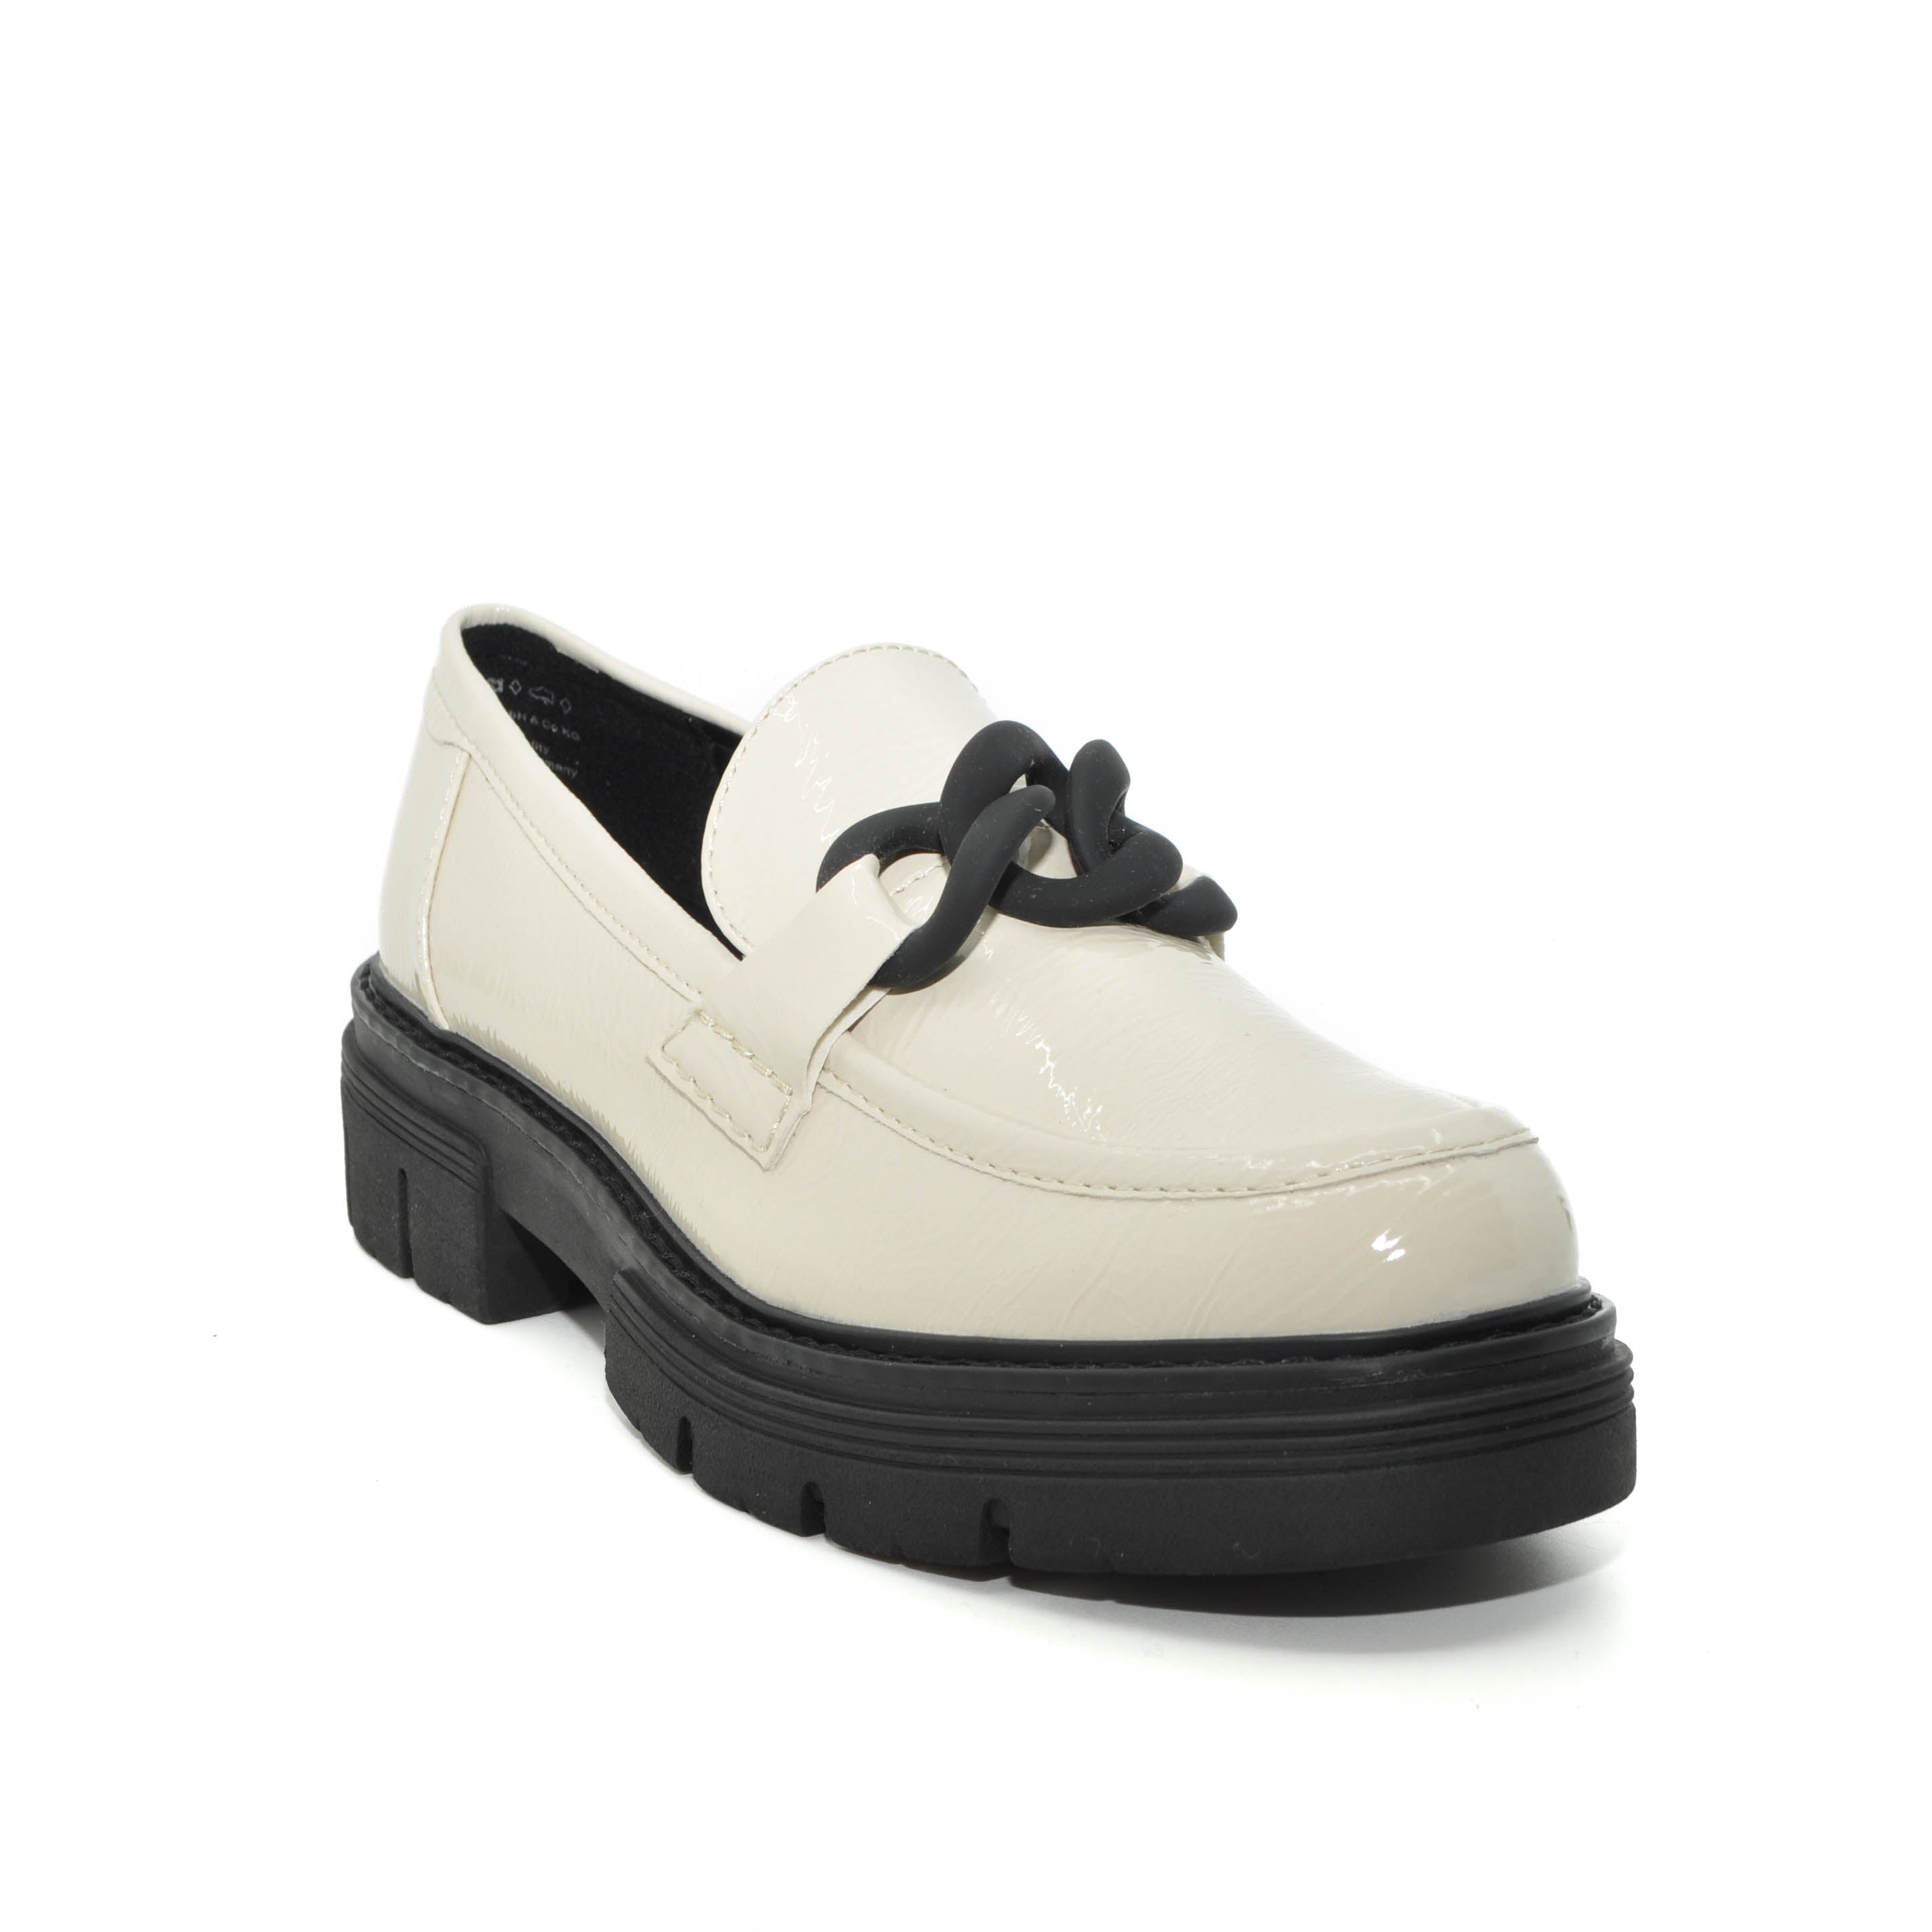 Marco Tozzi chunky loafers